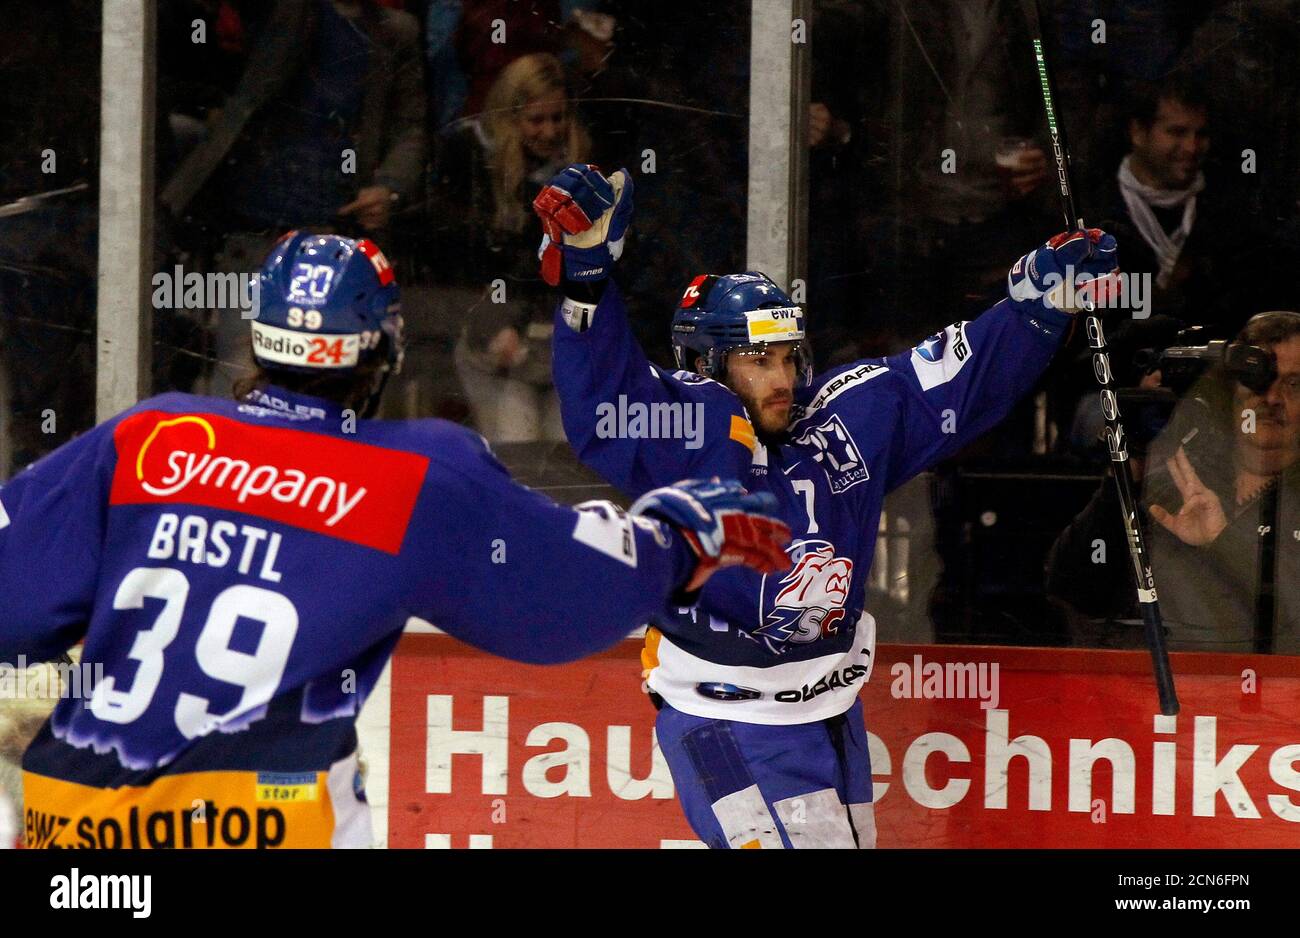 ZSC Lions' Thibaut Monnet celebrates with his teammate Mark Bastl (L) after scoring during their Swiss ice hockey play-off final against SC Bern (SCB) at the Hallenstadion arena in Zurich April 14, 2012. REUTERS/Arnd Wiegmann (SWITZERLAND - Tags: SPORT ICE HOCKEY) Stock Photo